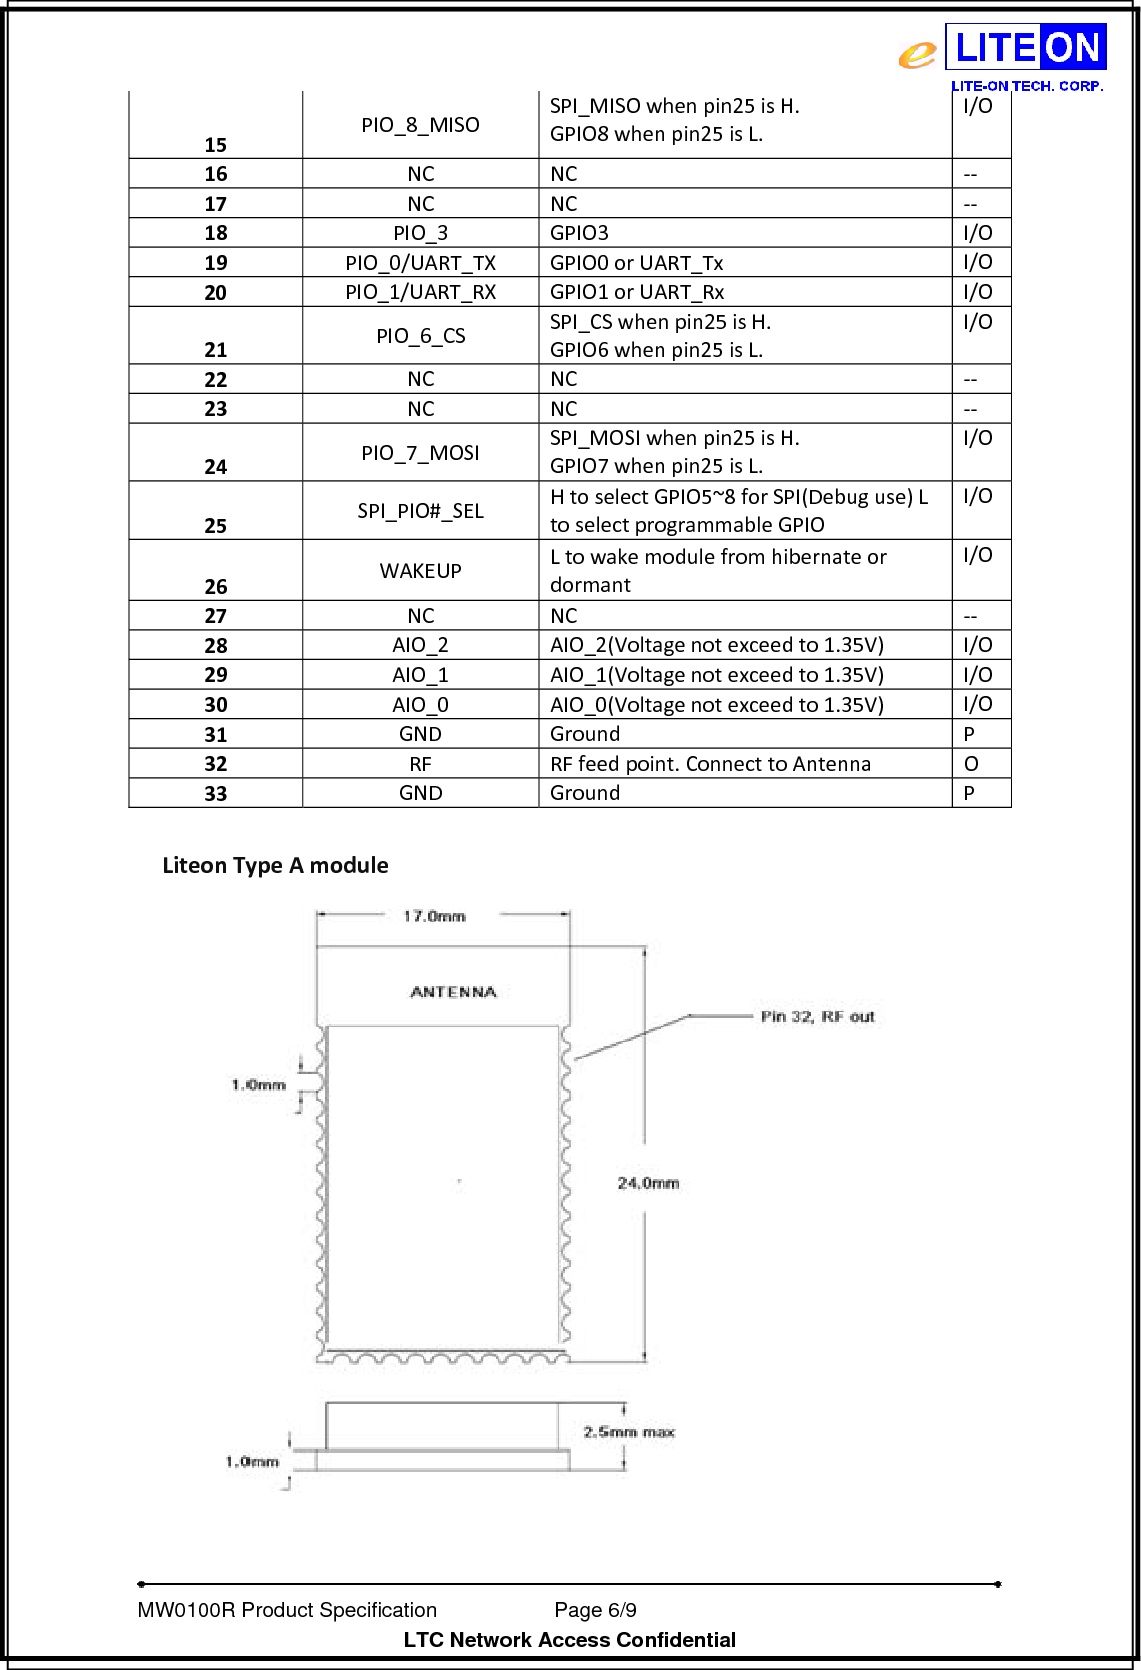   MW0100R Product Specification           Page 6/9                  LTC Network Access Confidential 15PIO_8_MISOSPI_MISOwhenpin25isH.GPIO8whenpin25isL.I/O16NCNC ‐‐17NCNC ‐‐18PIO_3GPIO3I/O19PIO_0/UART_TXGPIO0orUART_TxI/O20PIO_1/UART_RXGPIO1orUART_RxI/O21PIO_6_CSSPI_CSwhenpin25isH.GPIO6whenpin25isL.I/O22NCNC ‐‐23NCNC ‐‐24PIO_7_MOSISPI_MOSIwhenpin25isH.GPIO7whenpin25isL.I/O25SPI_PIO#_SELHtoselectGPIO5~8forSPI(Debuguse)LtoselectprogrammableGPIOI/O26WAKEUPLtowakemodulefromhibernateordormantI/O27NCNC ‐‐28AIO_2AIO_2(Voltagenotexceedto1.35V)I/O29AIO_1AIO_1(Voltagenotexceedto1.35V)I/O30AIO_0AIO_0(Voltagenotexceedto1.35V)I/O31GNDGroundP32RFRFfeedpoint.ConnecttoAntennaO33GND GroundPLiteonTypeAmodule 